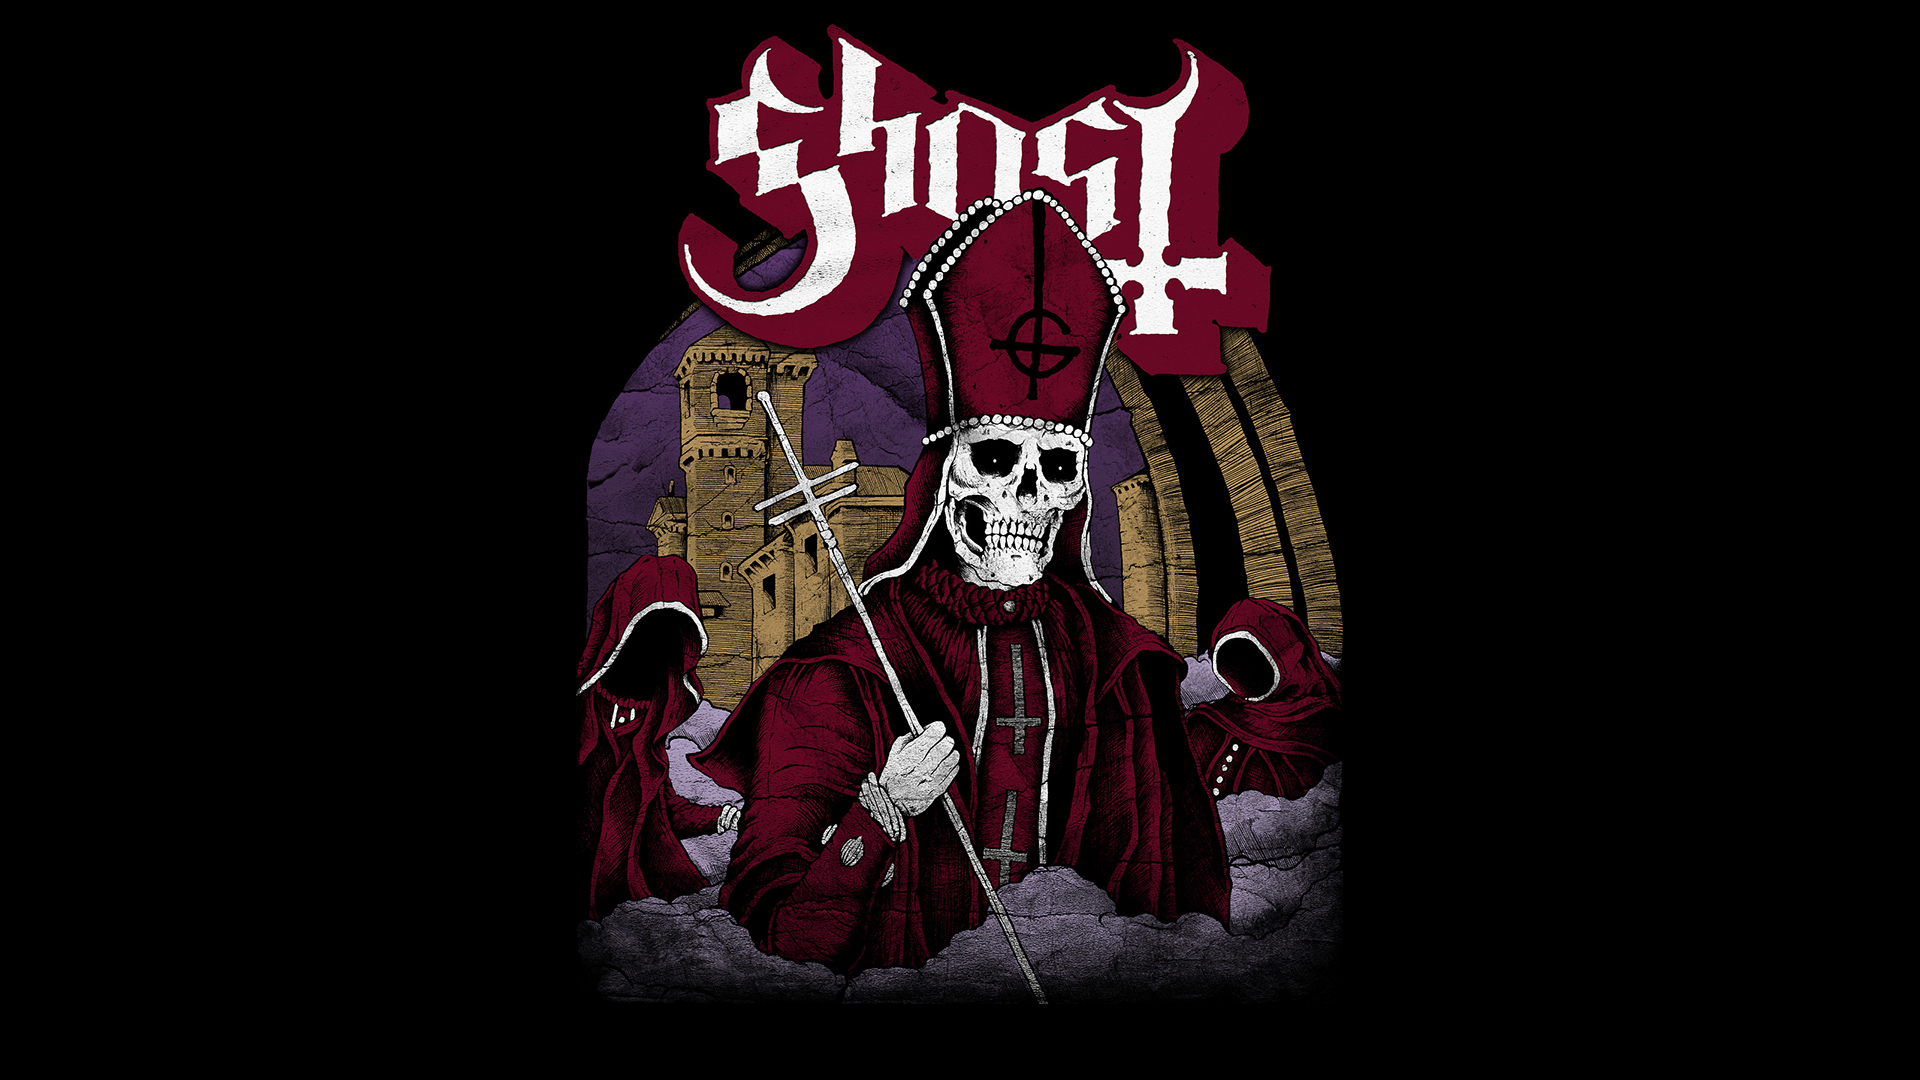 Papa Emeritus Ghost Ghost B C Wallpapers Hd Desktop And Mobile Backgrounds